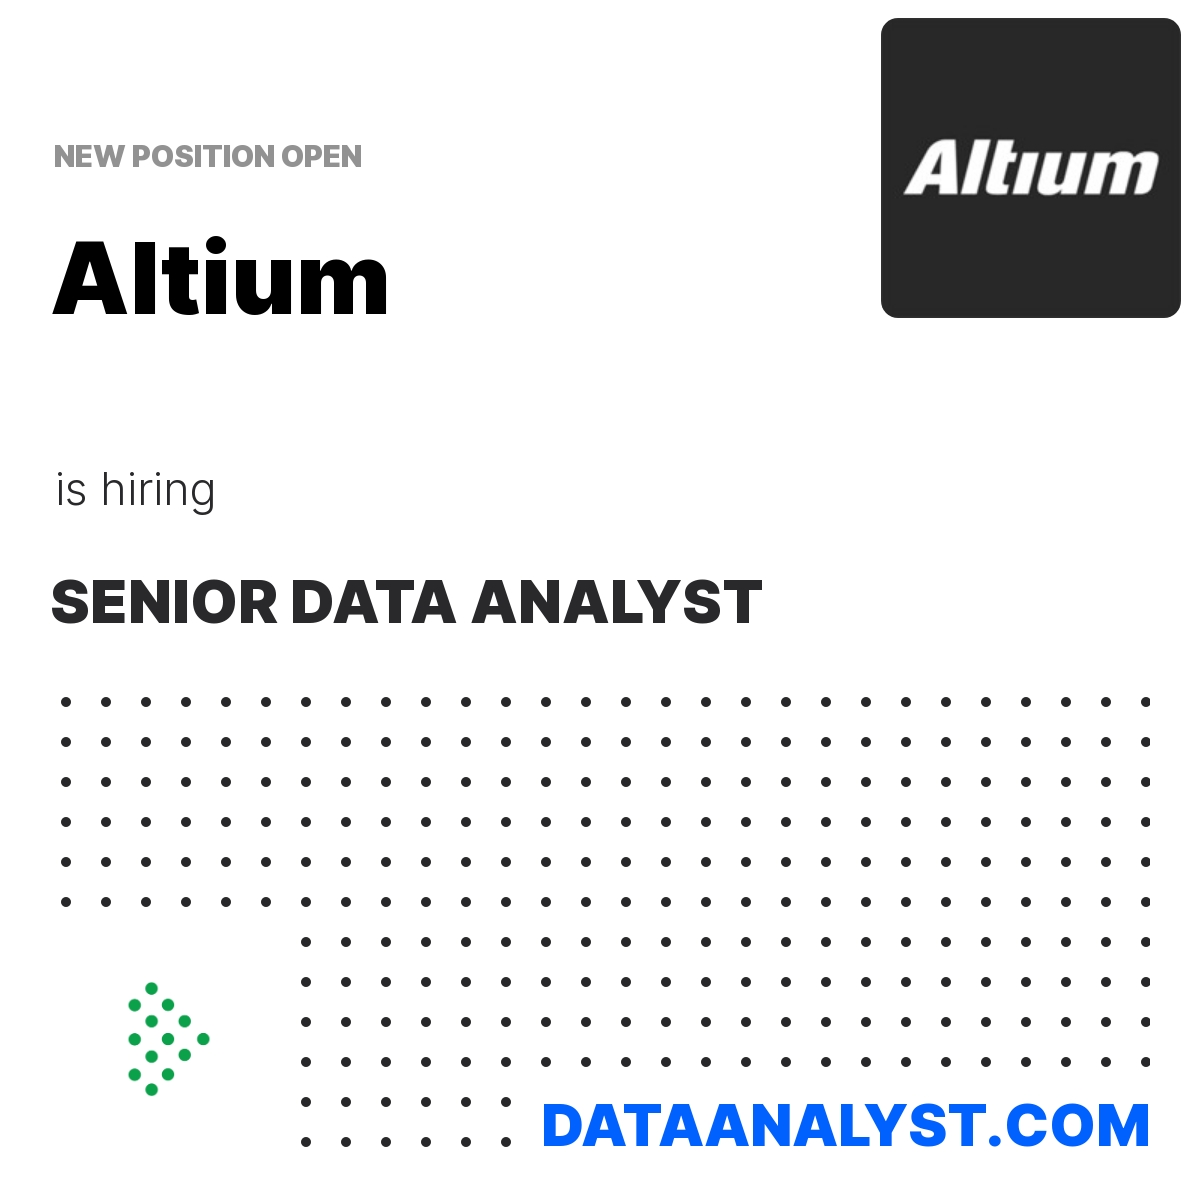 Altium is hiring a Senior Data Analyst with 5 - 10 years of experience.

Based in United States -  Remote, this is a Remote role.

More info: DataAnalyst.com

#DataScience #DataAnalytics #DataAnalyst #Tech #Hiring